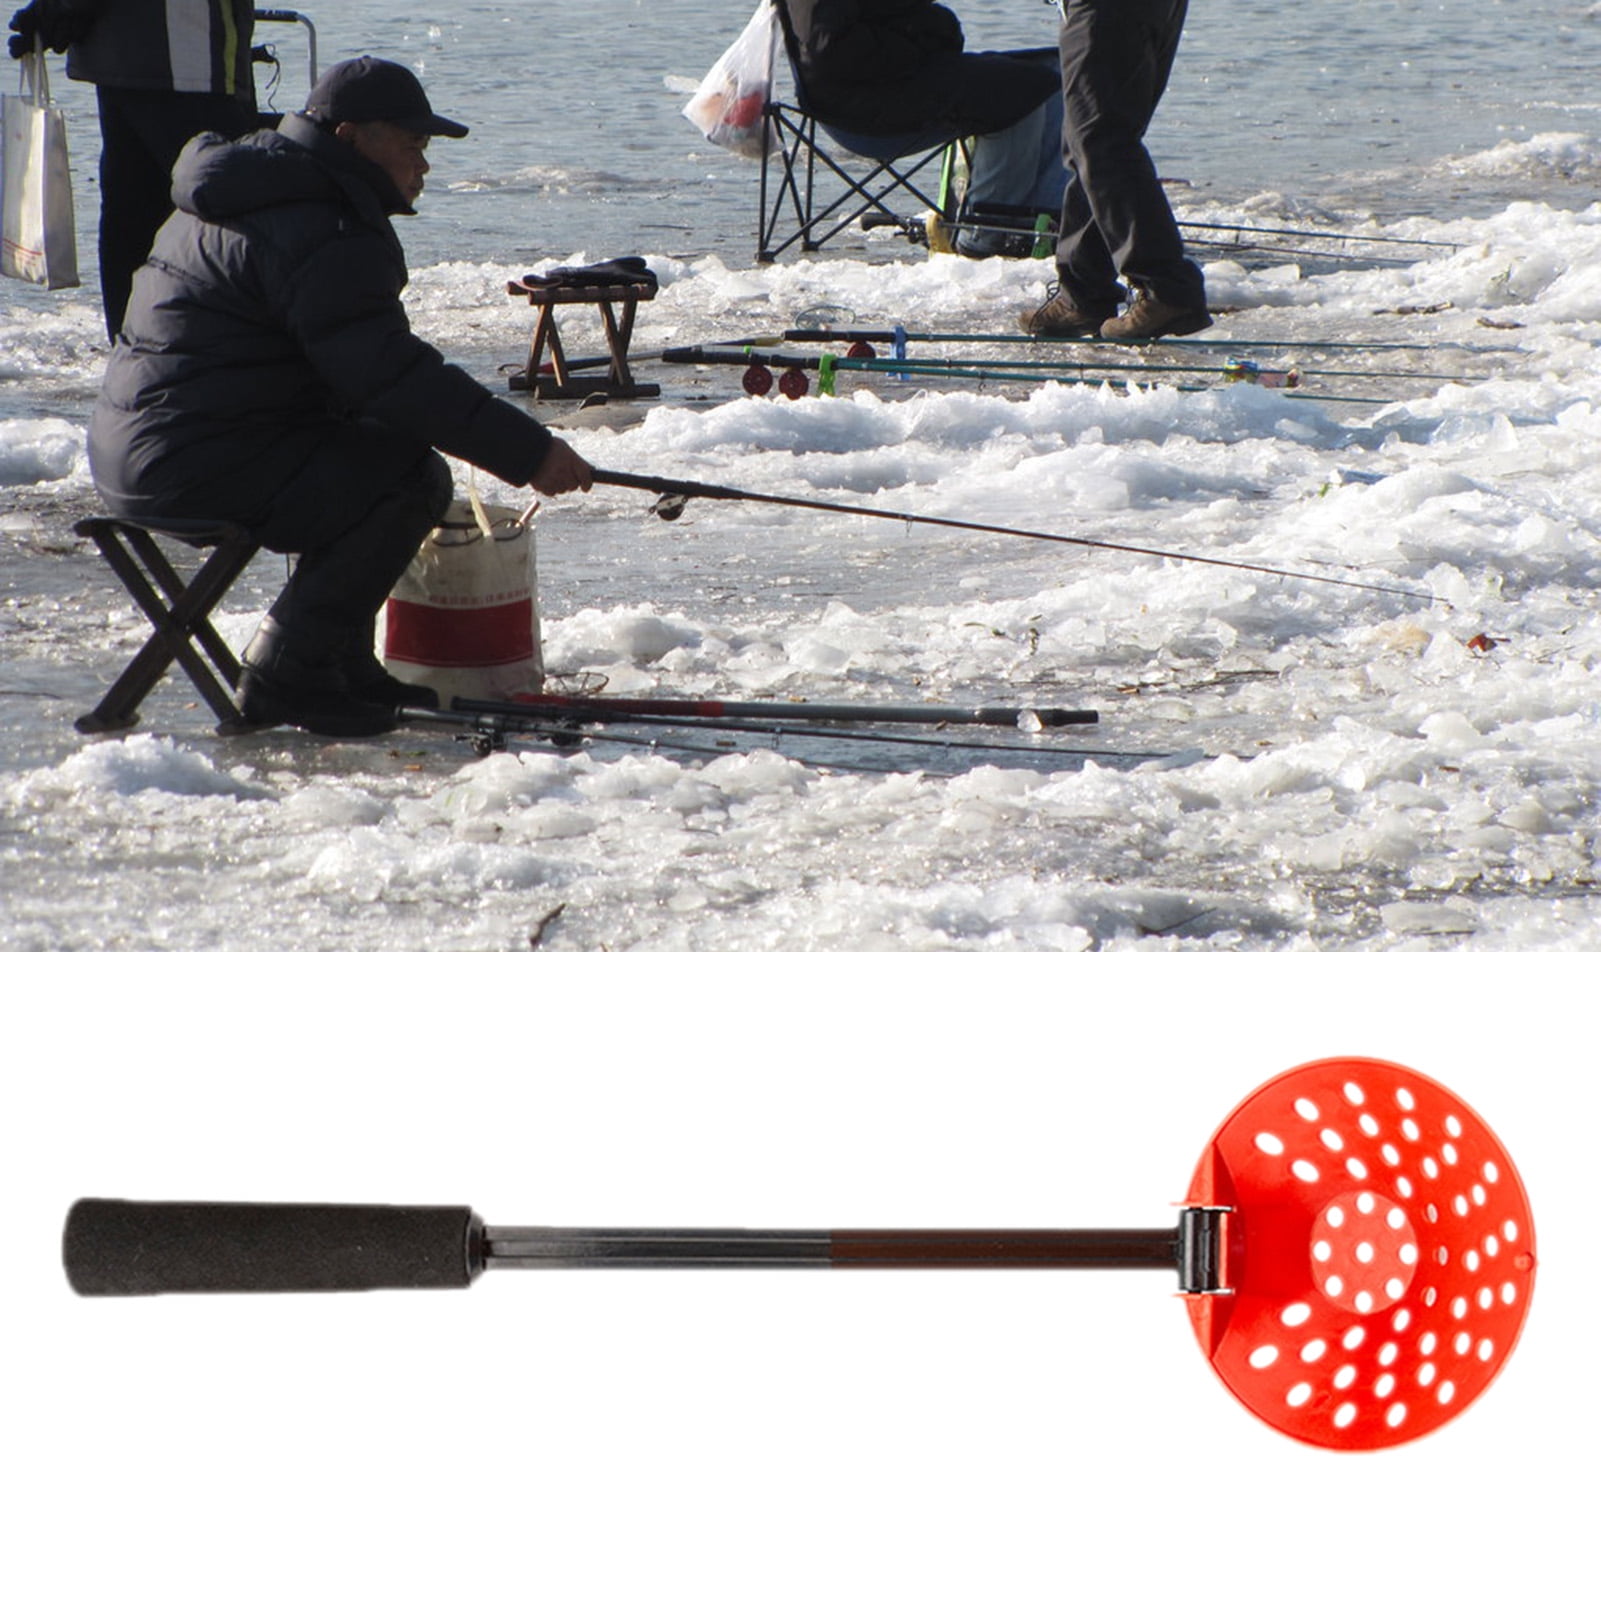 Plastic Skimmer Scoop Laying on Ice while Ice Fishing Stock Image